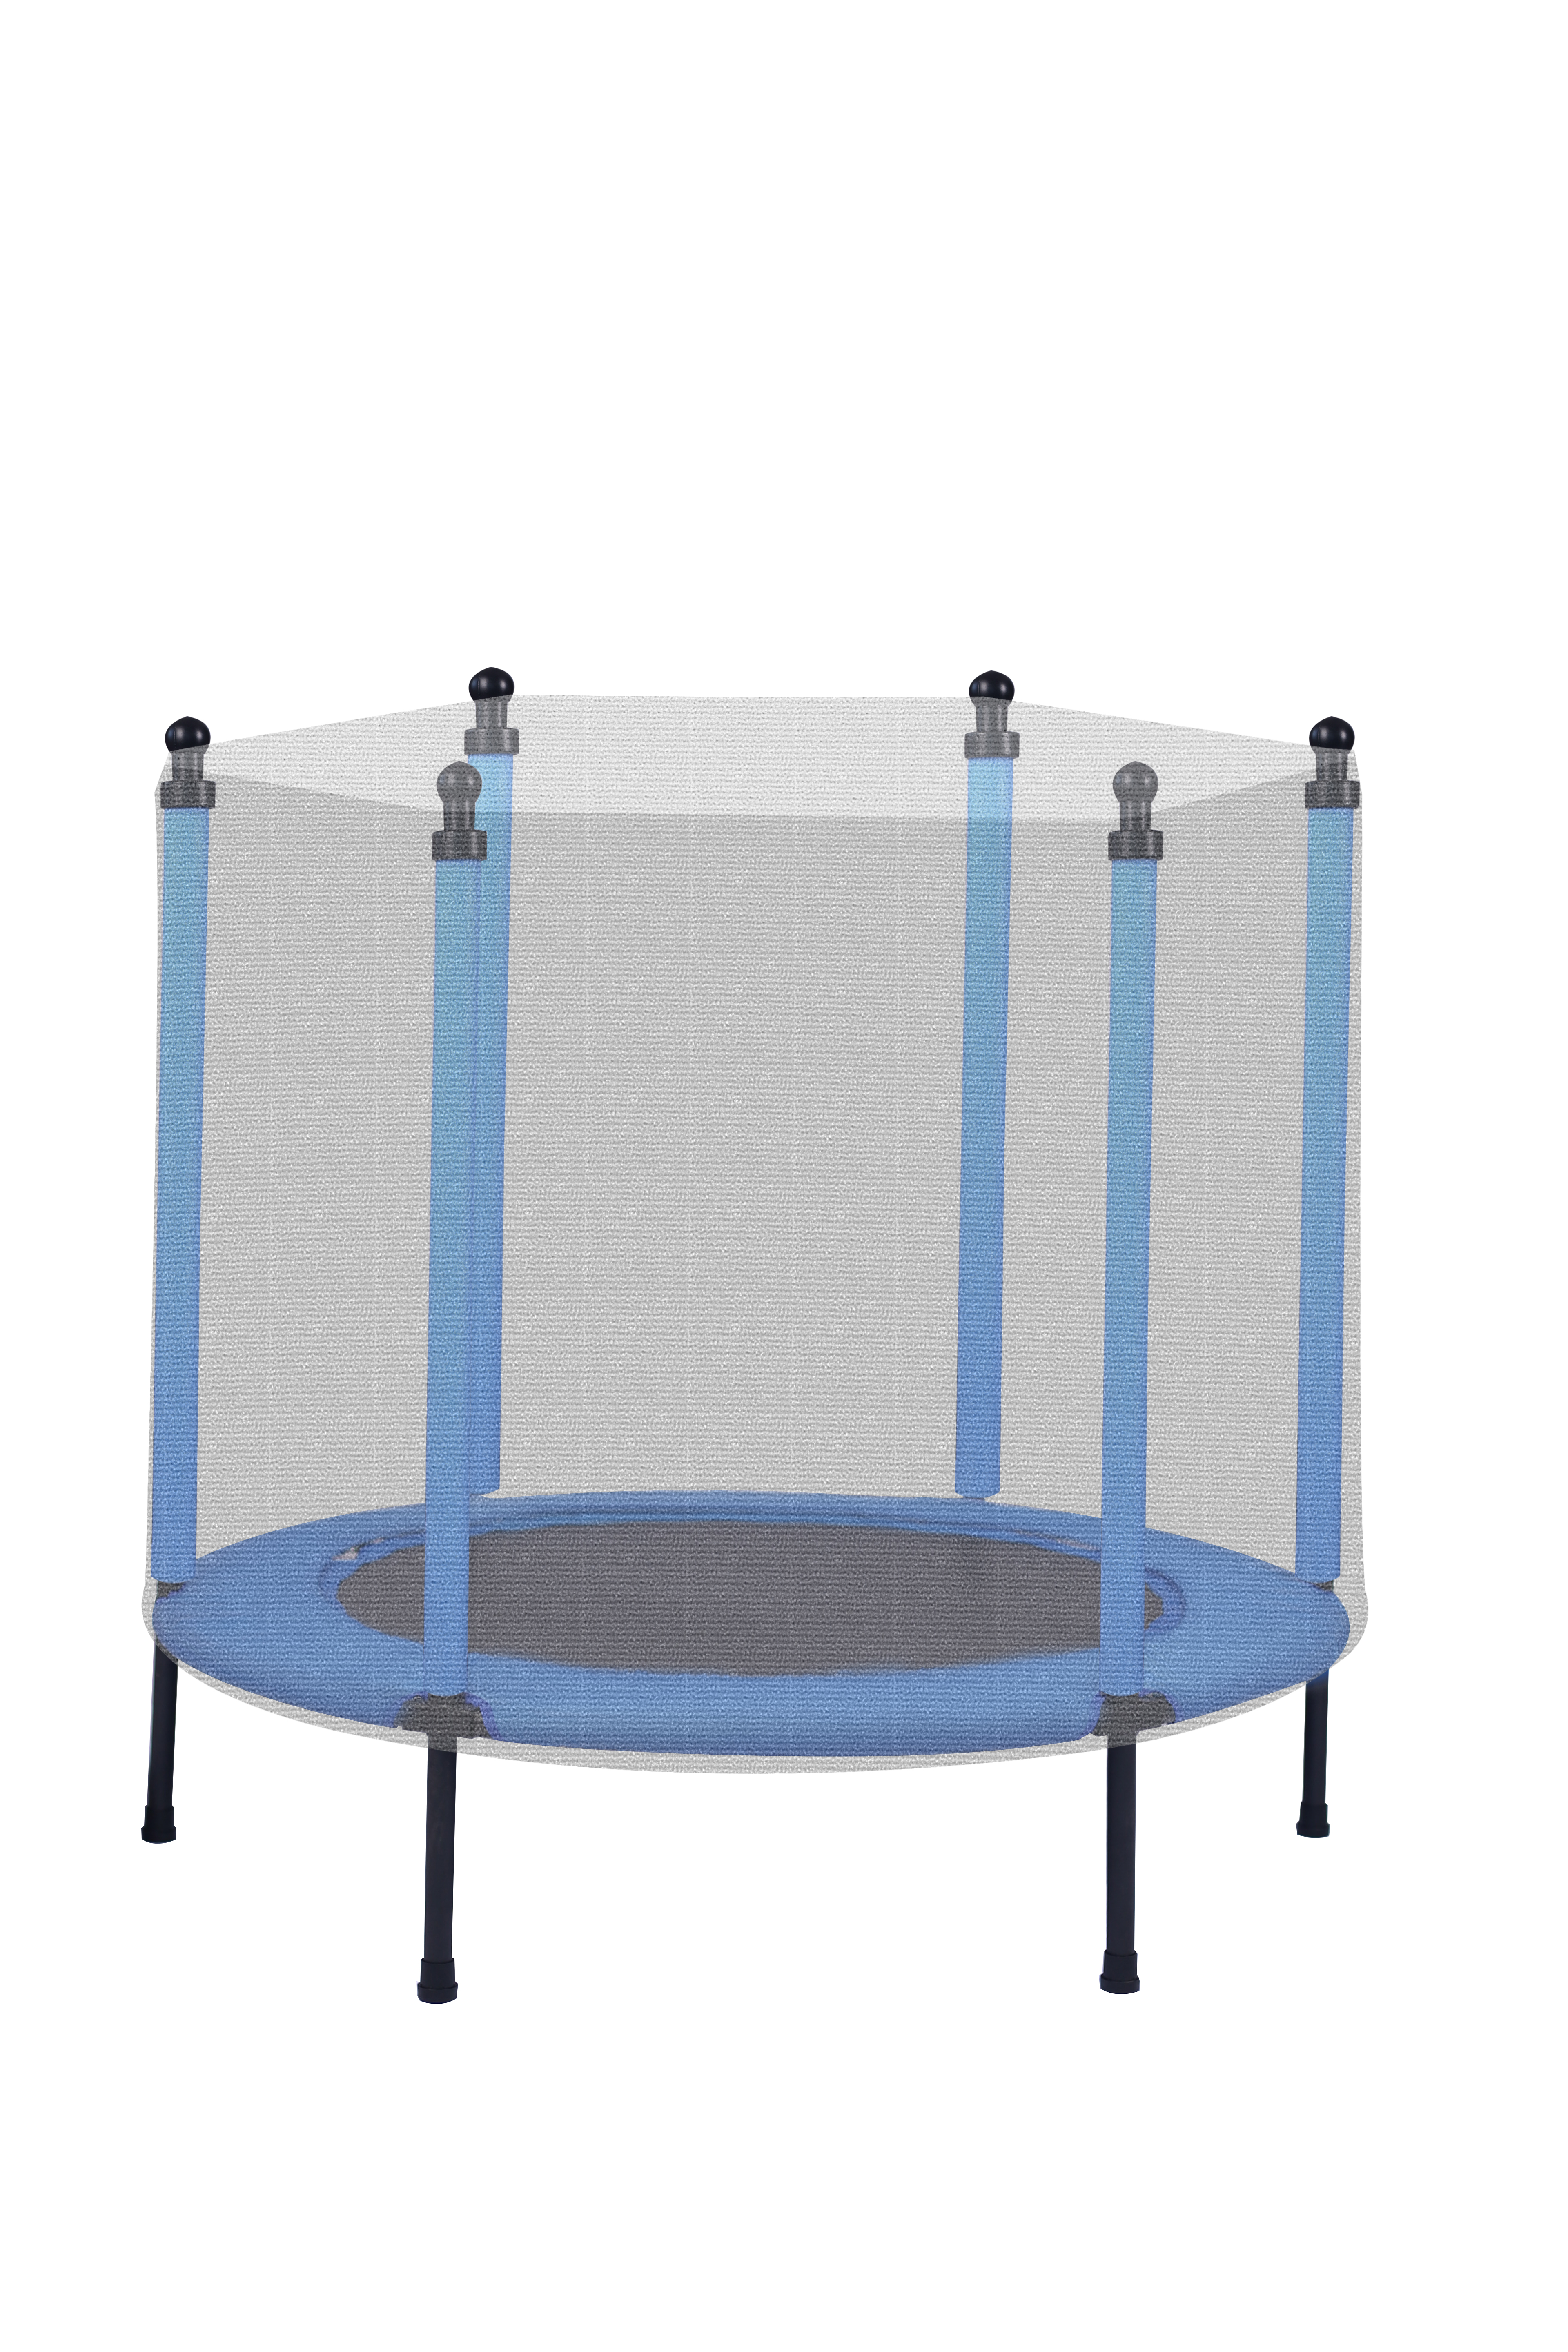 Kids Trampoline for Toddlers with Net, 48in Toddler Trampoline with Enclosure, Mini Trampoeline Indoor Blue-Boyel Living